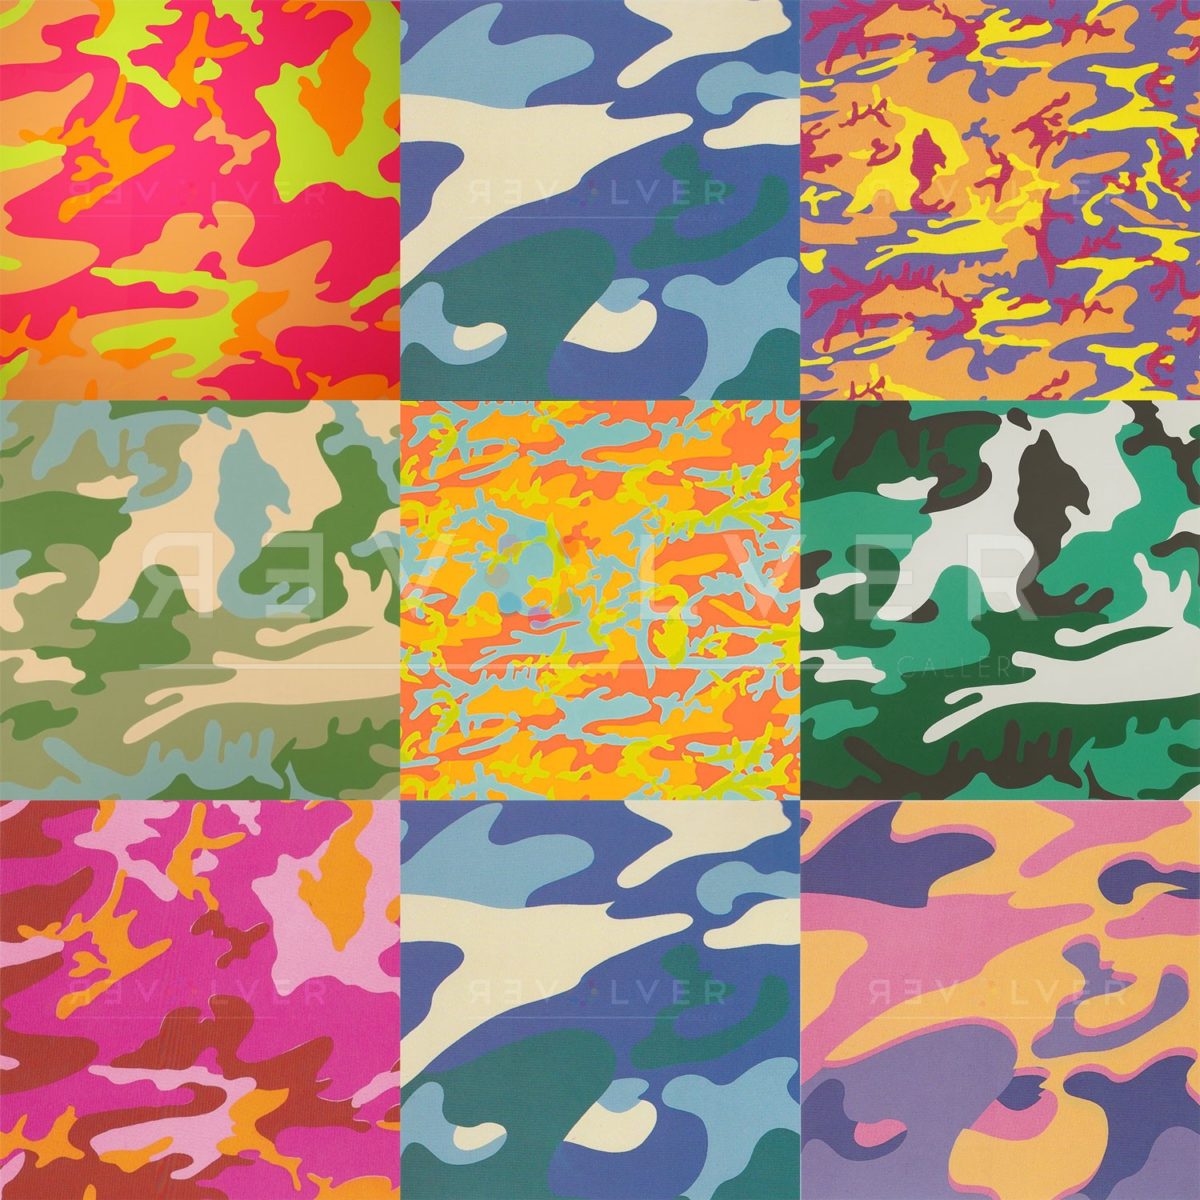 Andy Warhol Camouflage complete portfolio. Grid image showing every screenprint from the series.